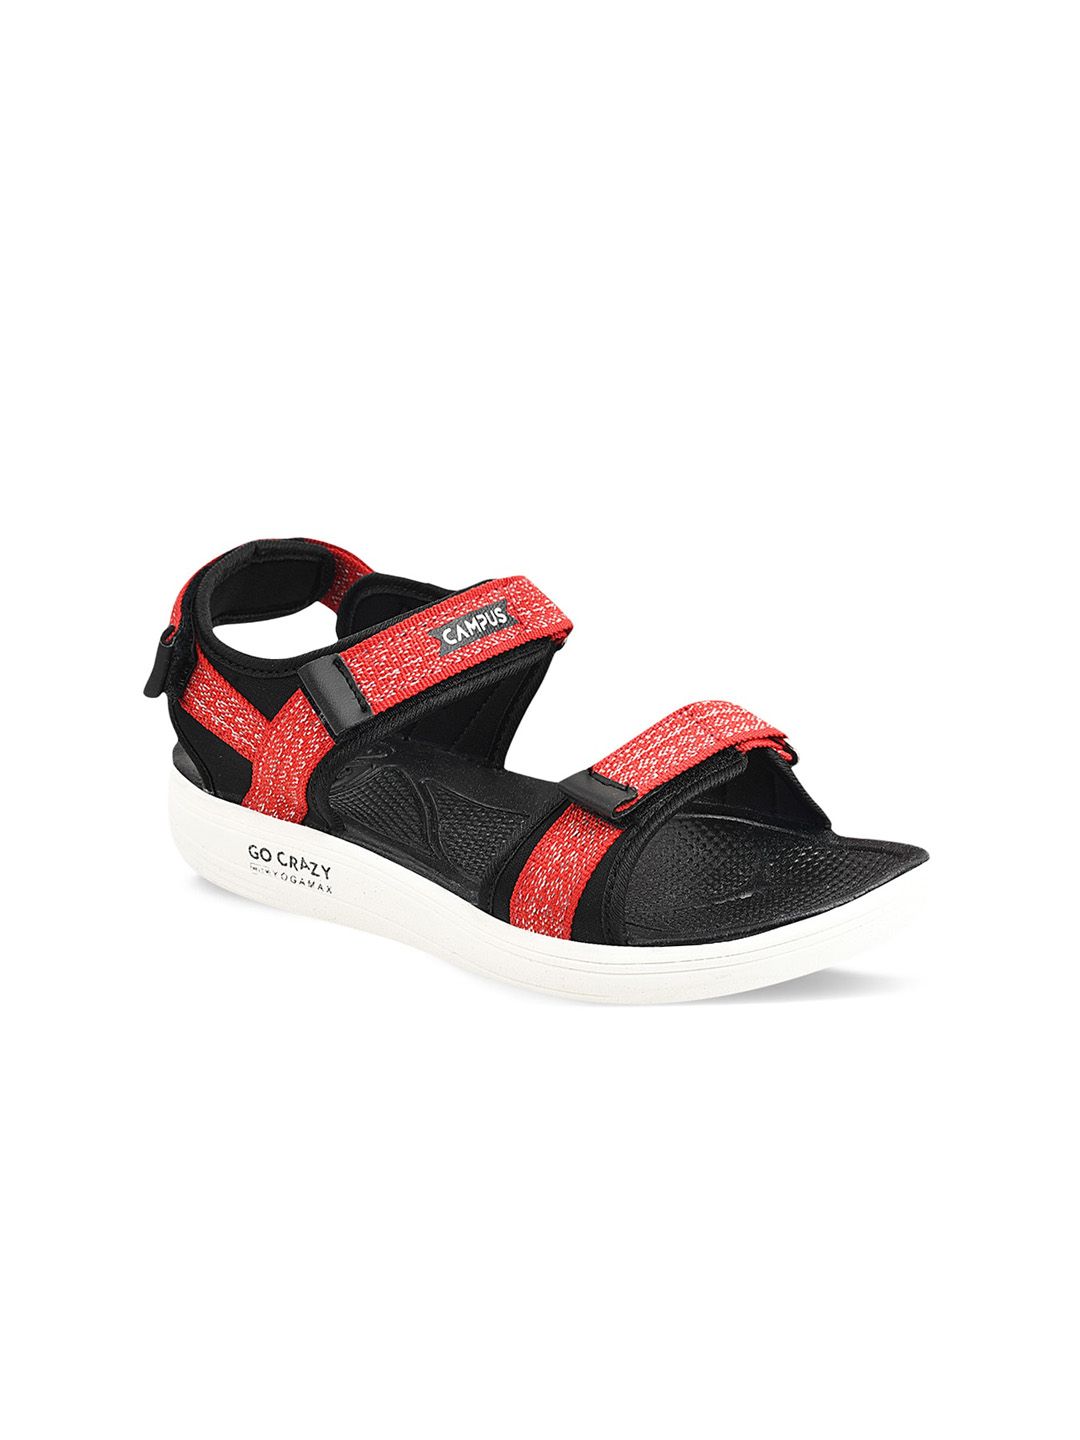 Campus Women Black & Red Solid Sports Sandals Price in India